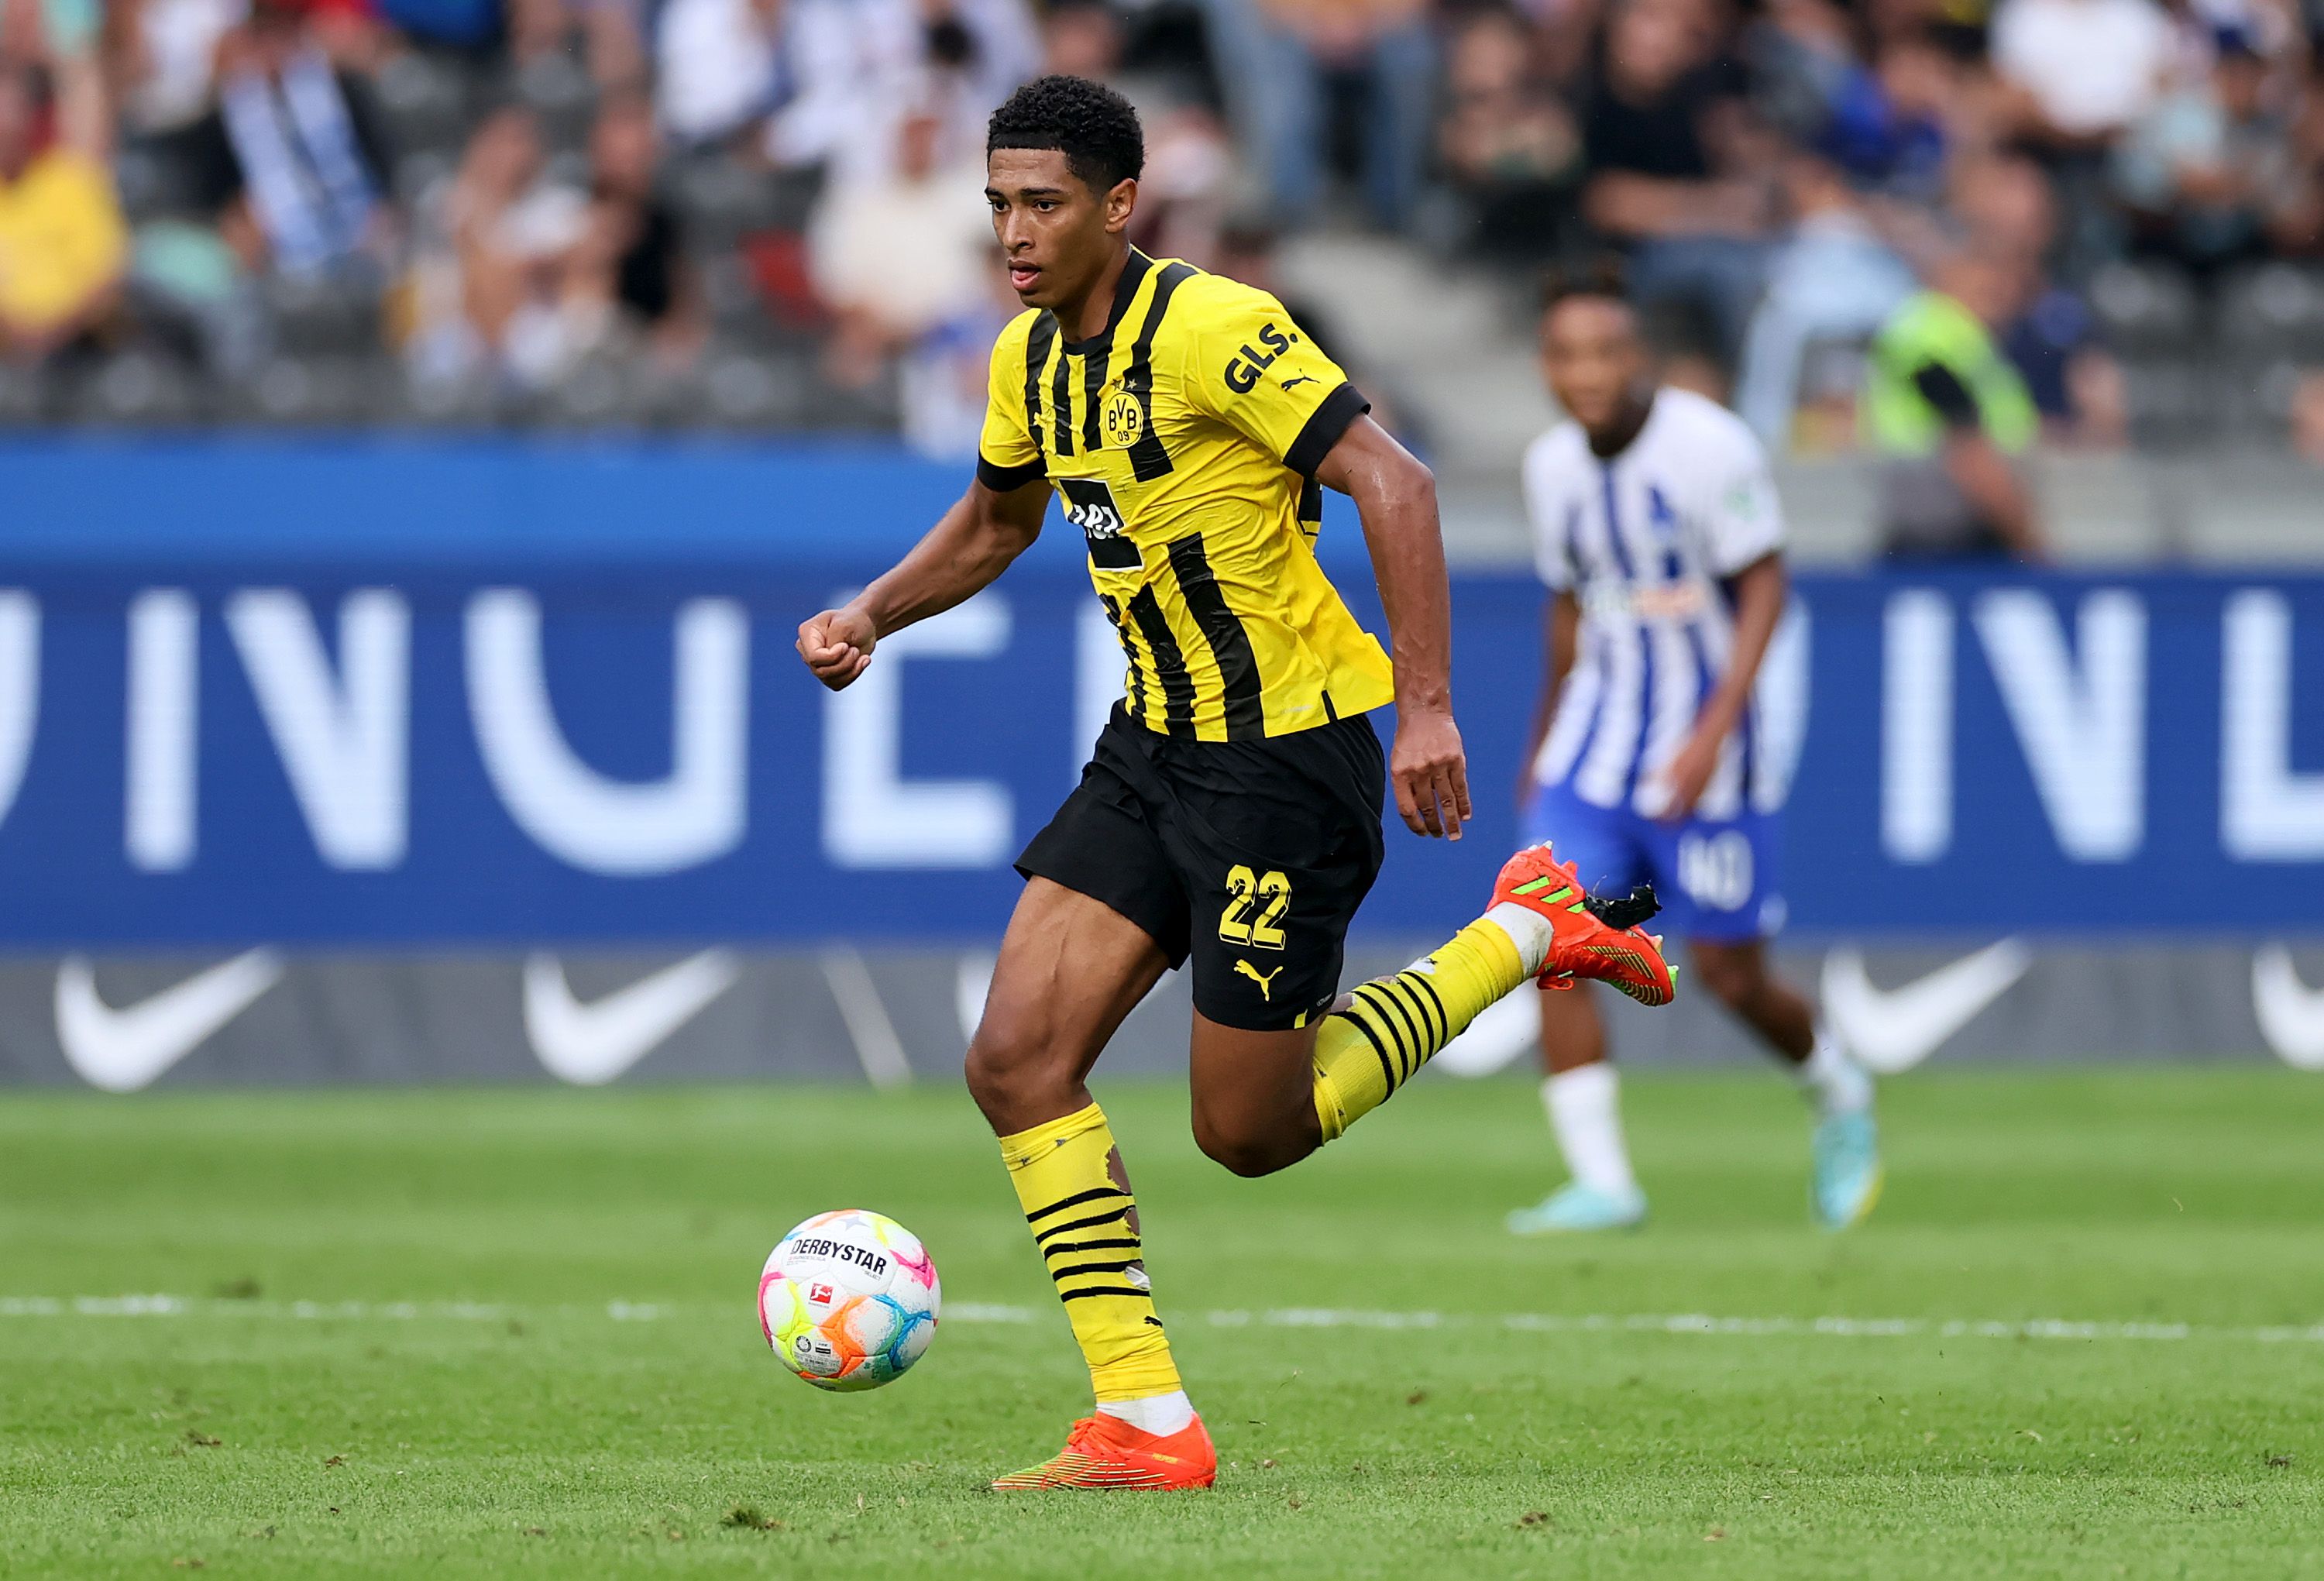 Jude Bellingham of Borussia Dortmund controls the ball during the Bundesliga match between Hertha BSC and Borussia Dortmund at Olympiastadion on August 27, 2022 in Berlin, Germany.